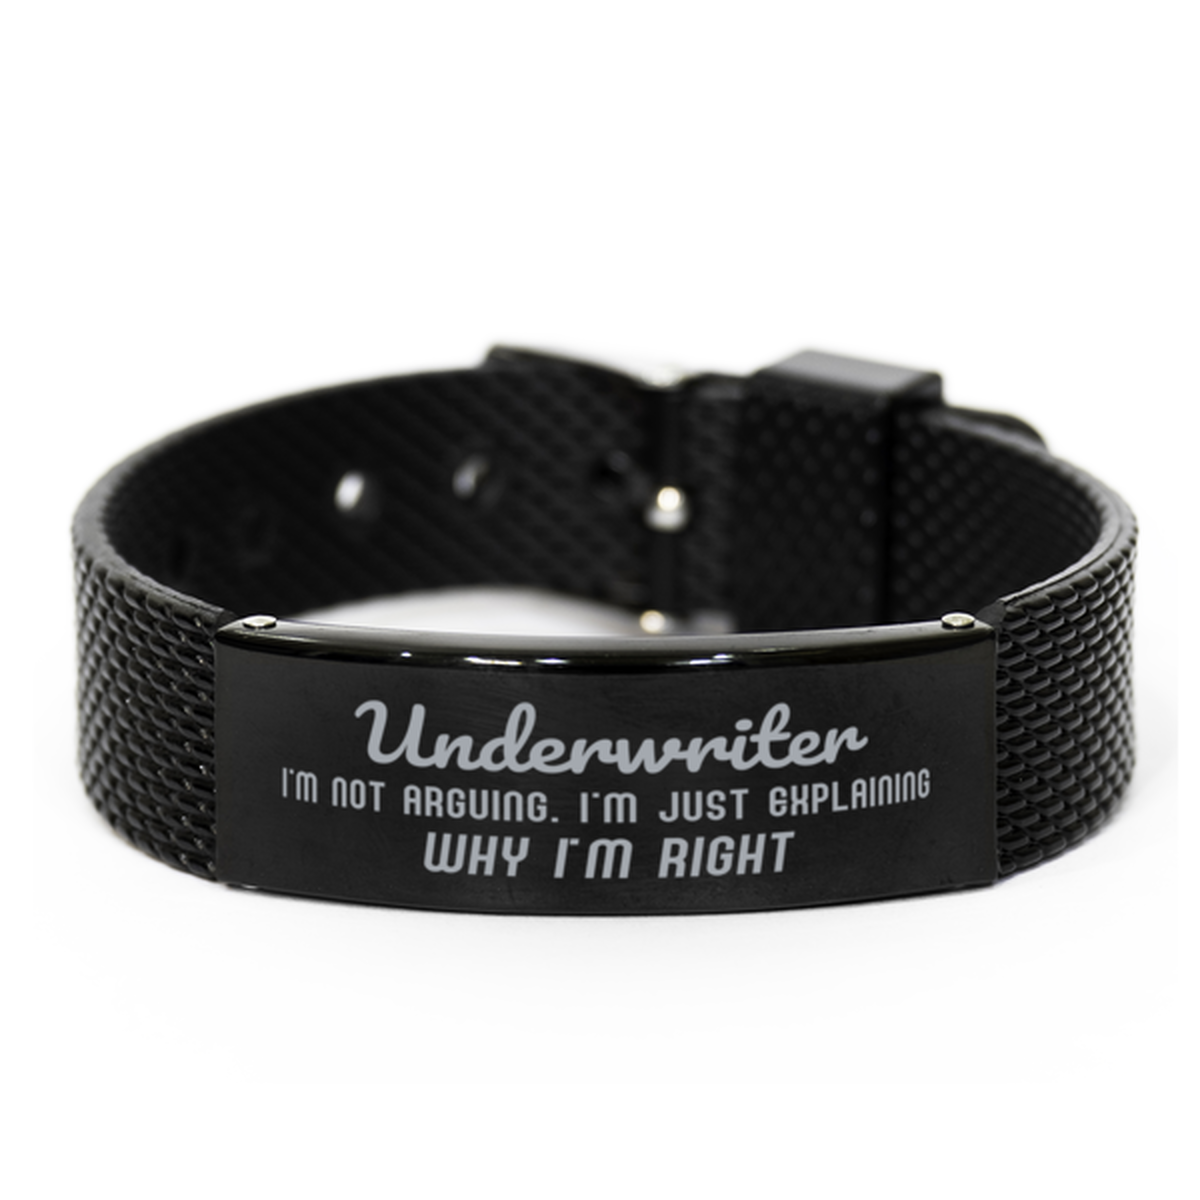 Underwriter I'm not Arguing. I'm Just Explaining Why I'm RIGHT Black Shark Mesh Bracelet, Funny Saying Quote Underwriter Gifts For Underwriter Graduation Birthday Christmas Gifts for Men Women Coworker